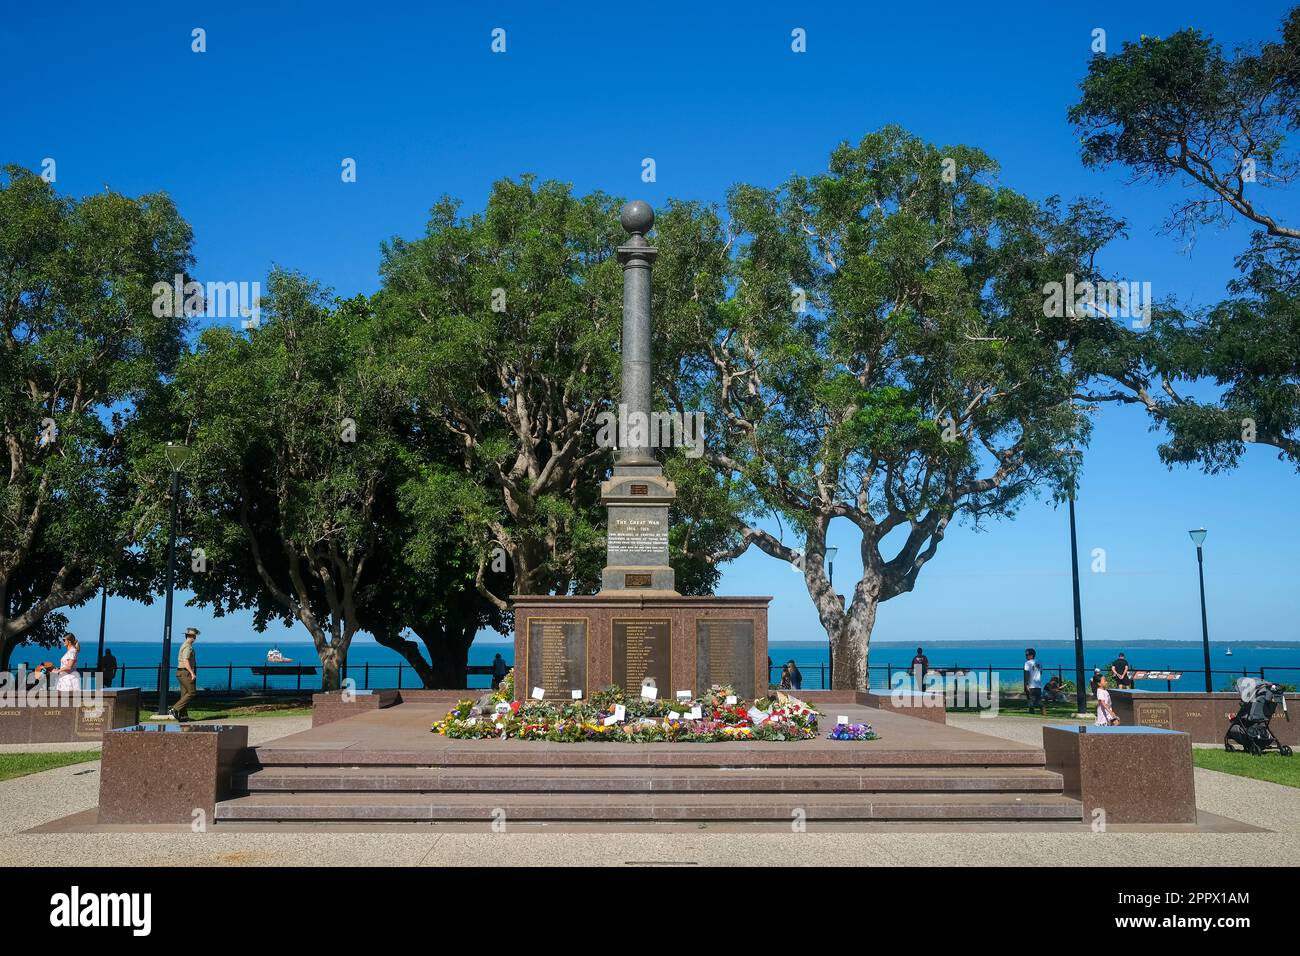 The Cenotaph on Bicentennial Park in Darwin, Northern Territory, Australia commemorates Australian servicemen and women who have served in conflicts i Stock Photo